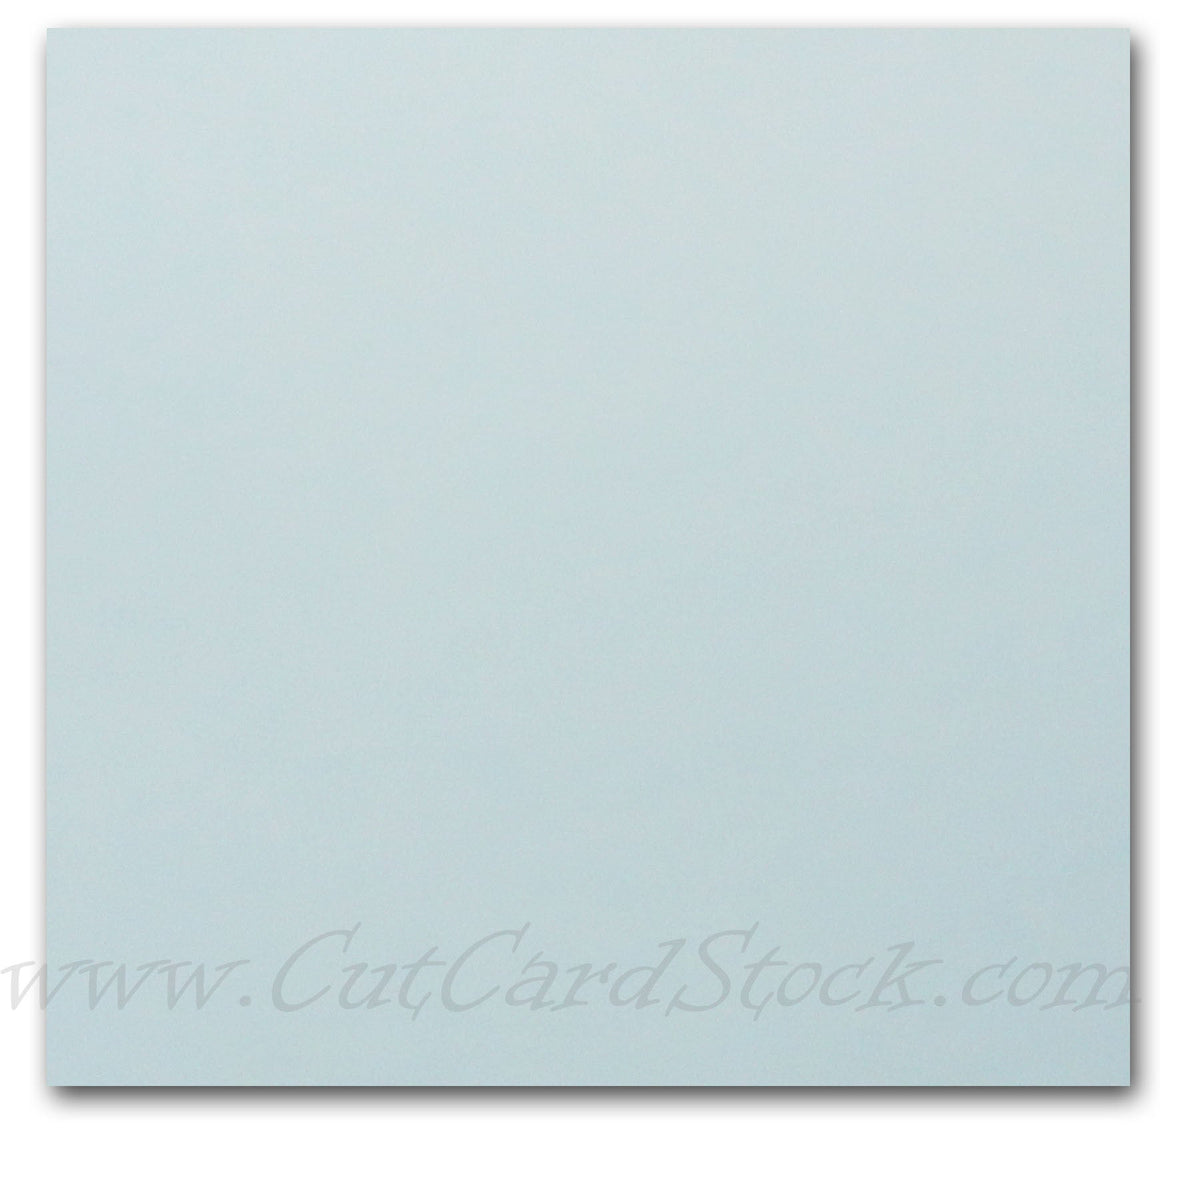 Blue Pastel Discount Card stock